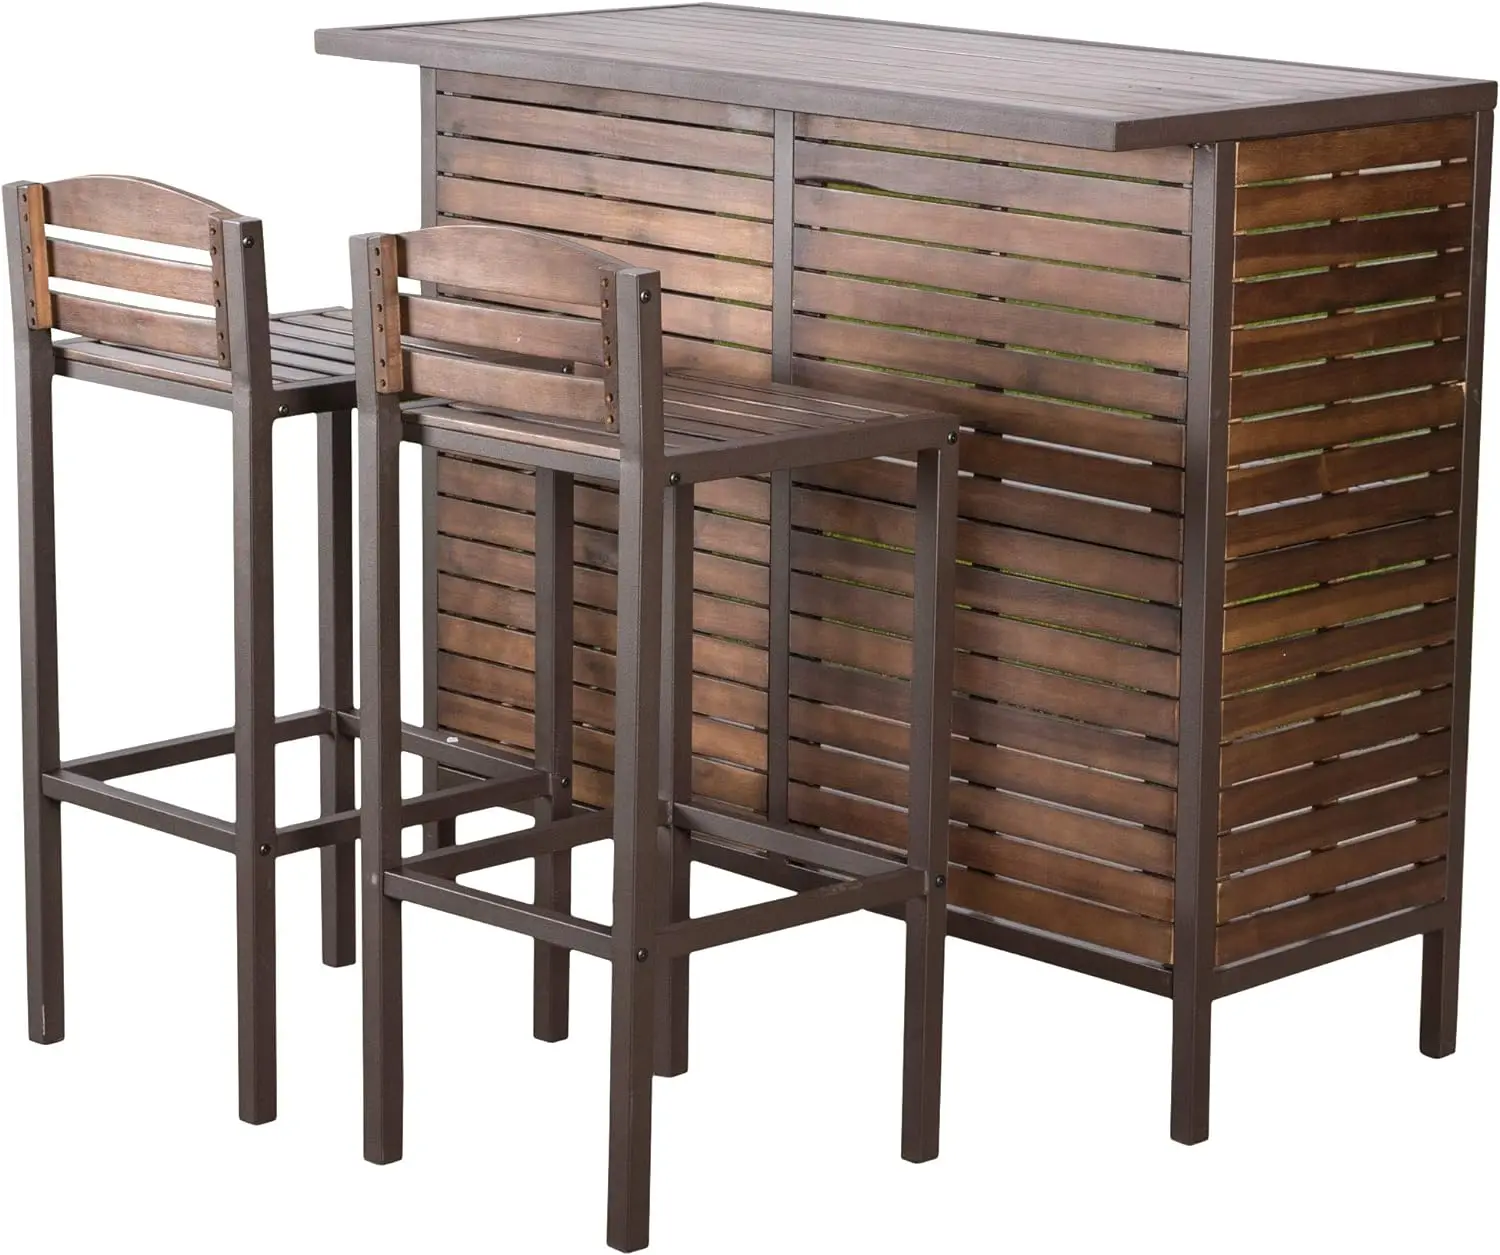 

Christopher Knight Home Leni Indoor Acacia Bar Set with Rustic Metal Finish Accents, Dark Brown / Rustic Metal